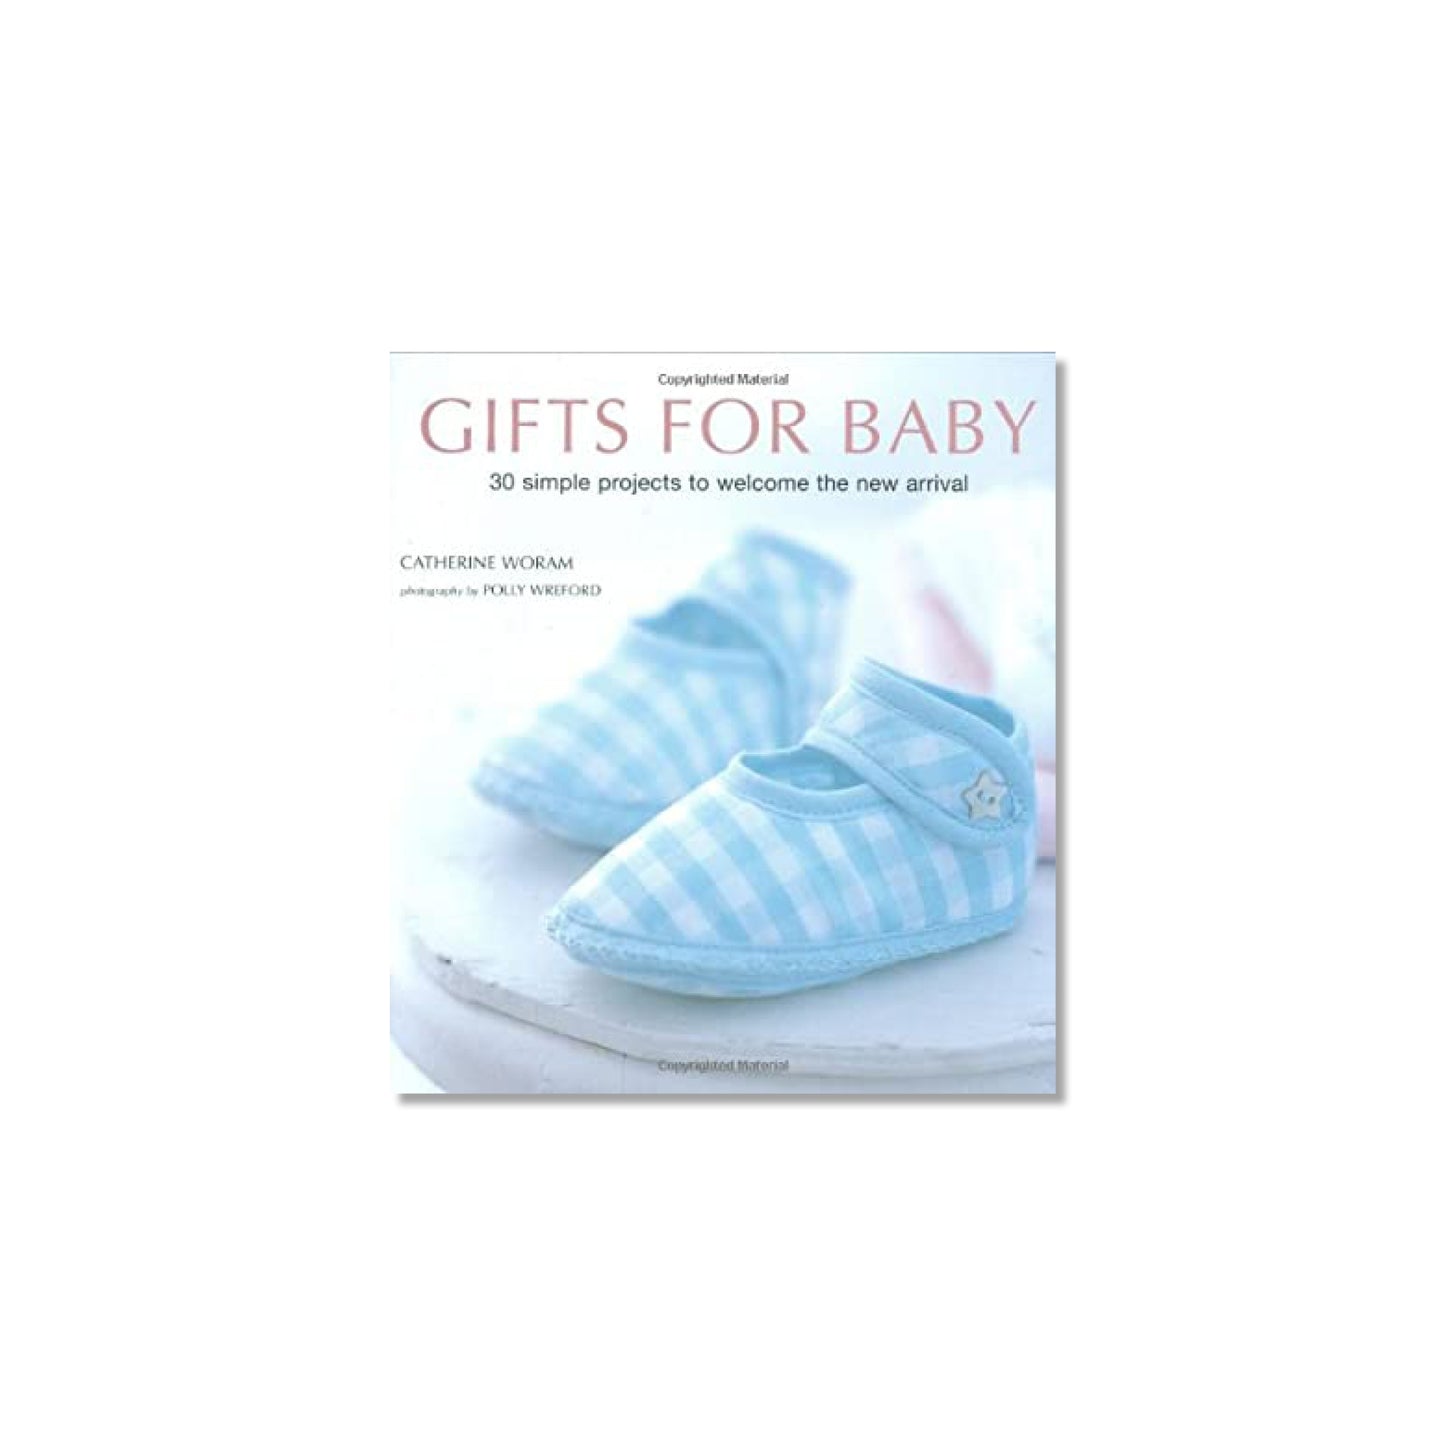 Woram, Catherine - GIFTS FOR BABY